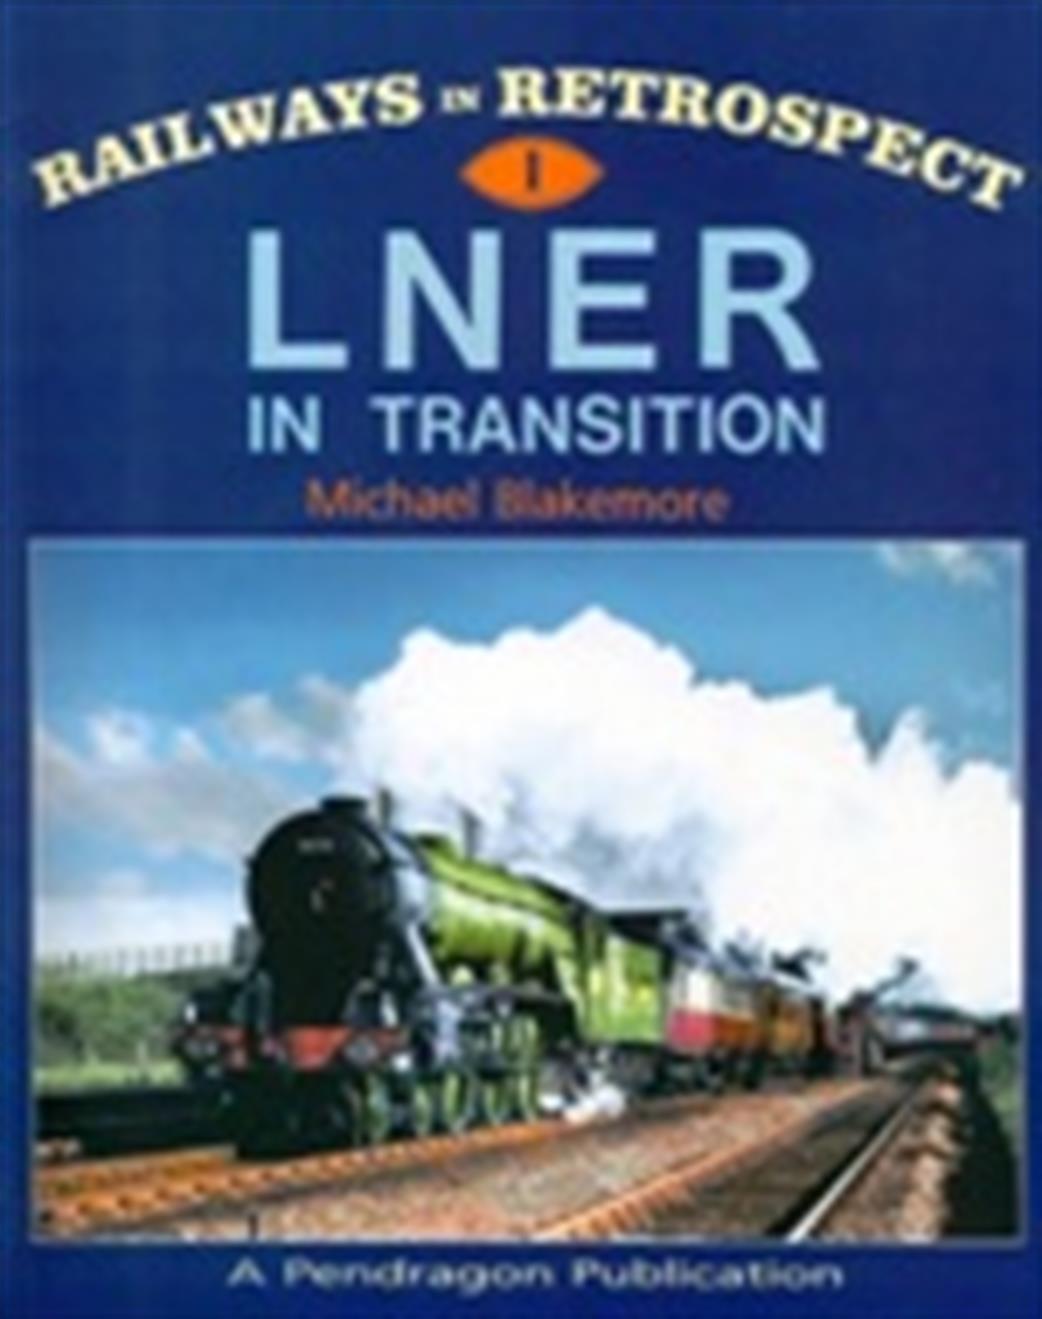 9781899816118 LNER in Transition by Michael Blakemore